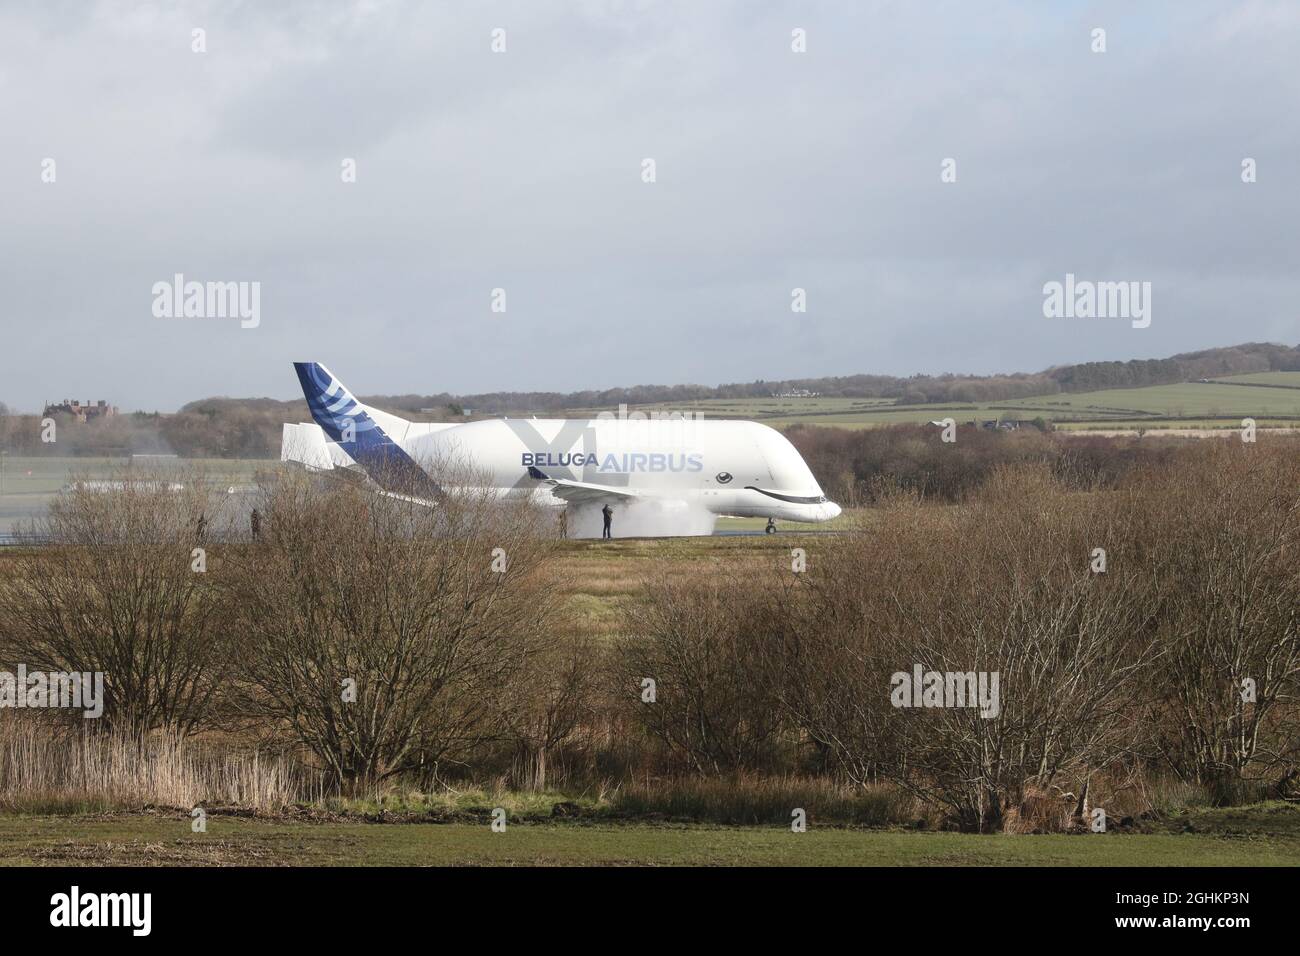 Glasgow Prestwick Airport , Ayrshire, Scotland. UK 11 Mar 2020. Airbus A300-600ST known as the Beluga on a training exercise Stock Photo